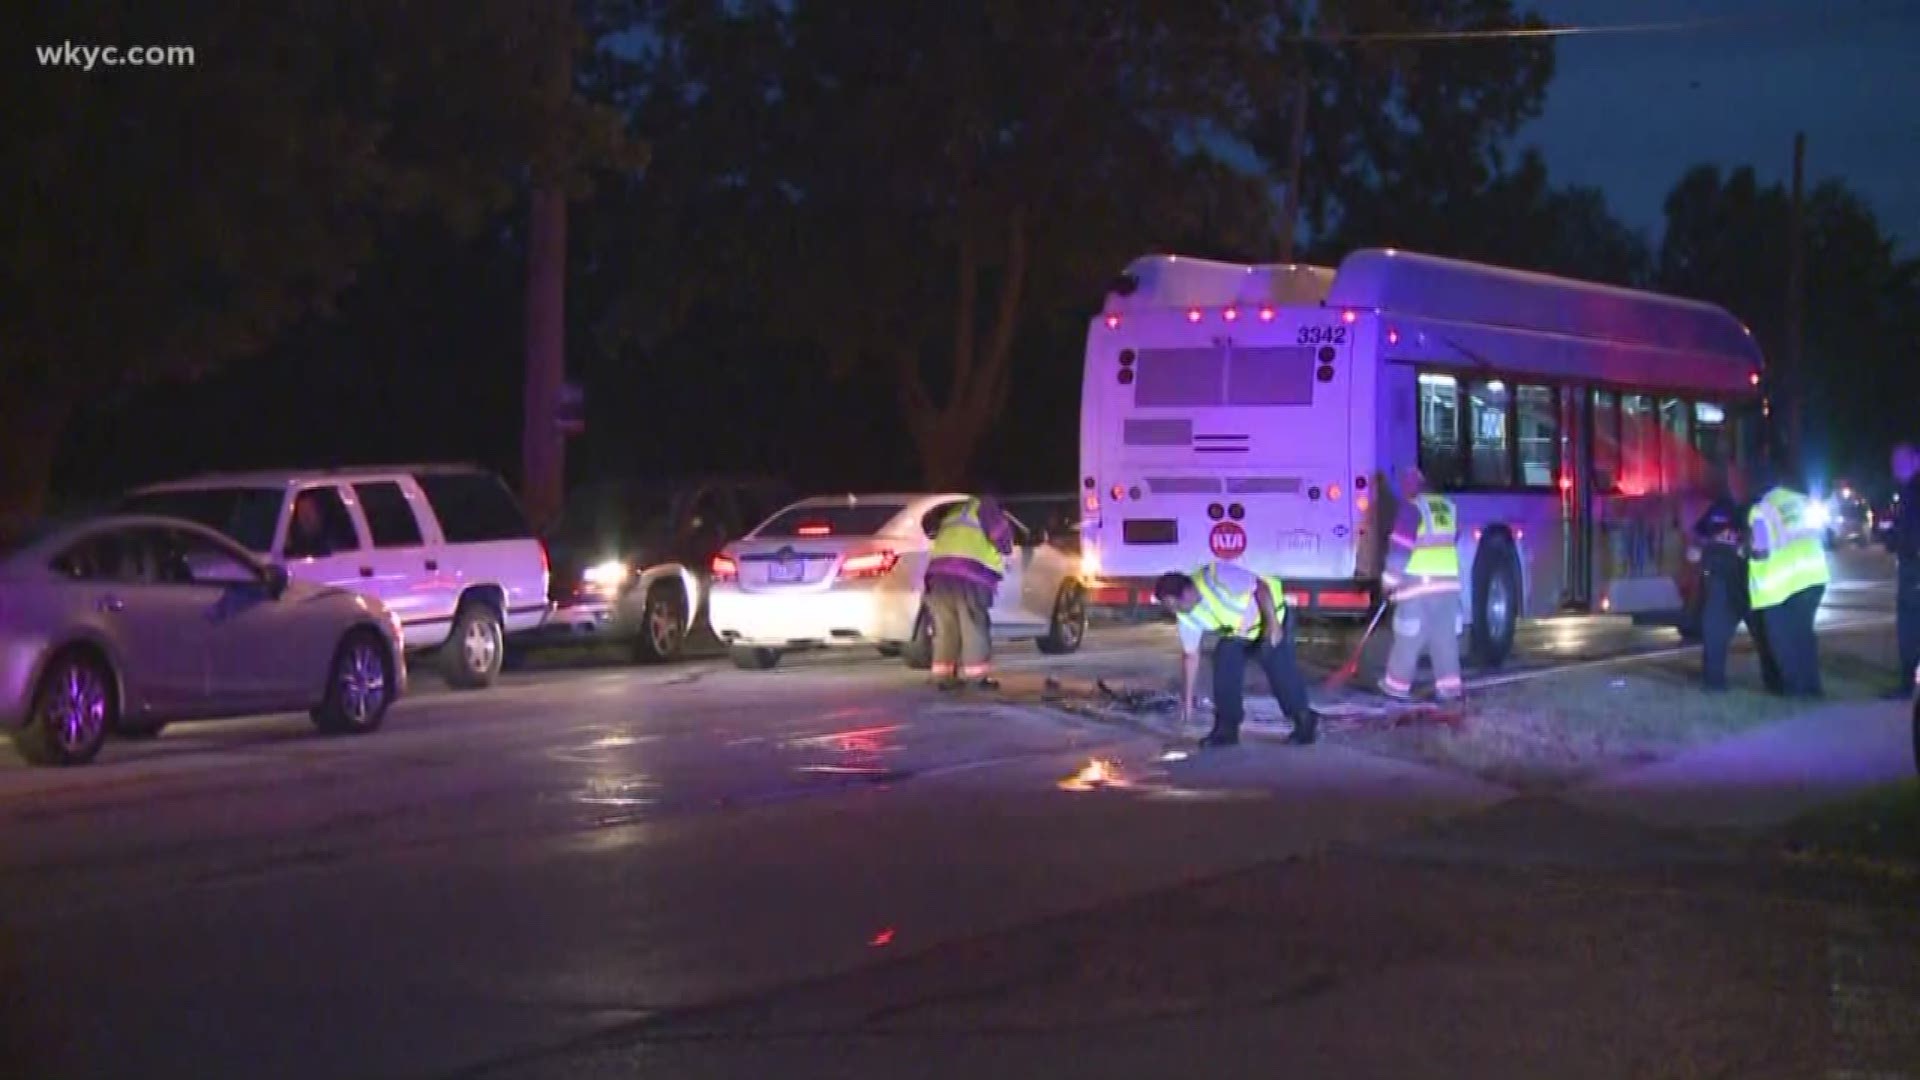 A car and a bus collided on Aurora Road in Solon, leading to nine injuries.